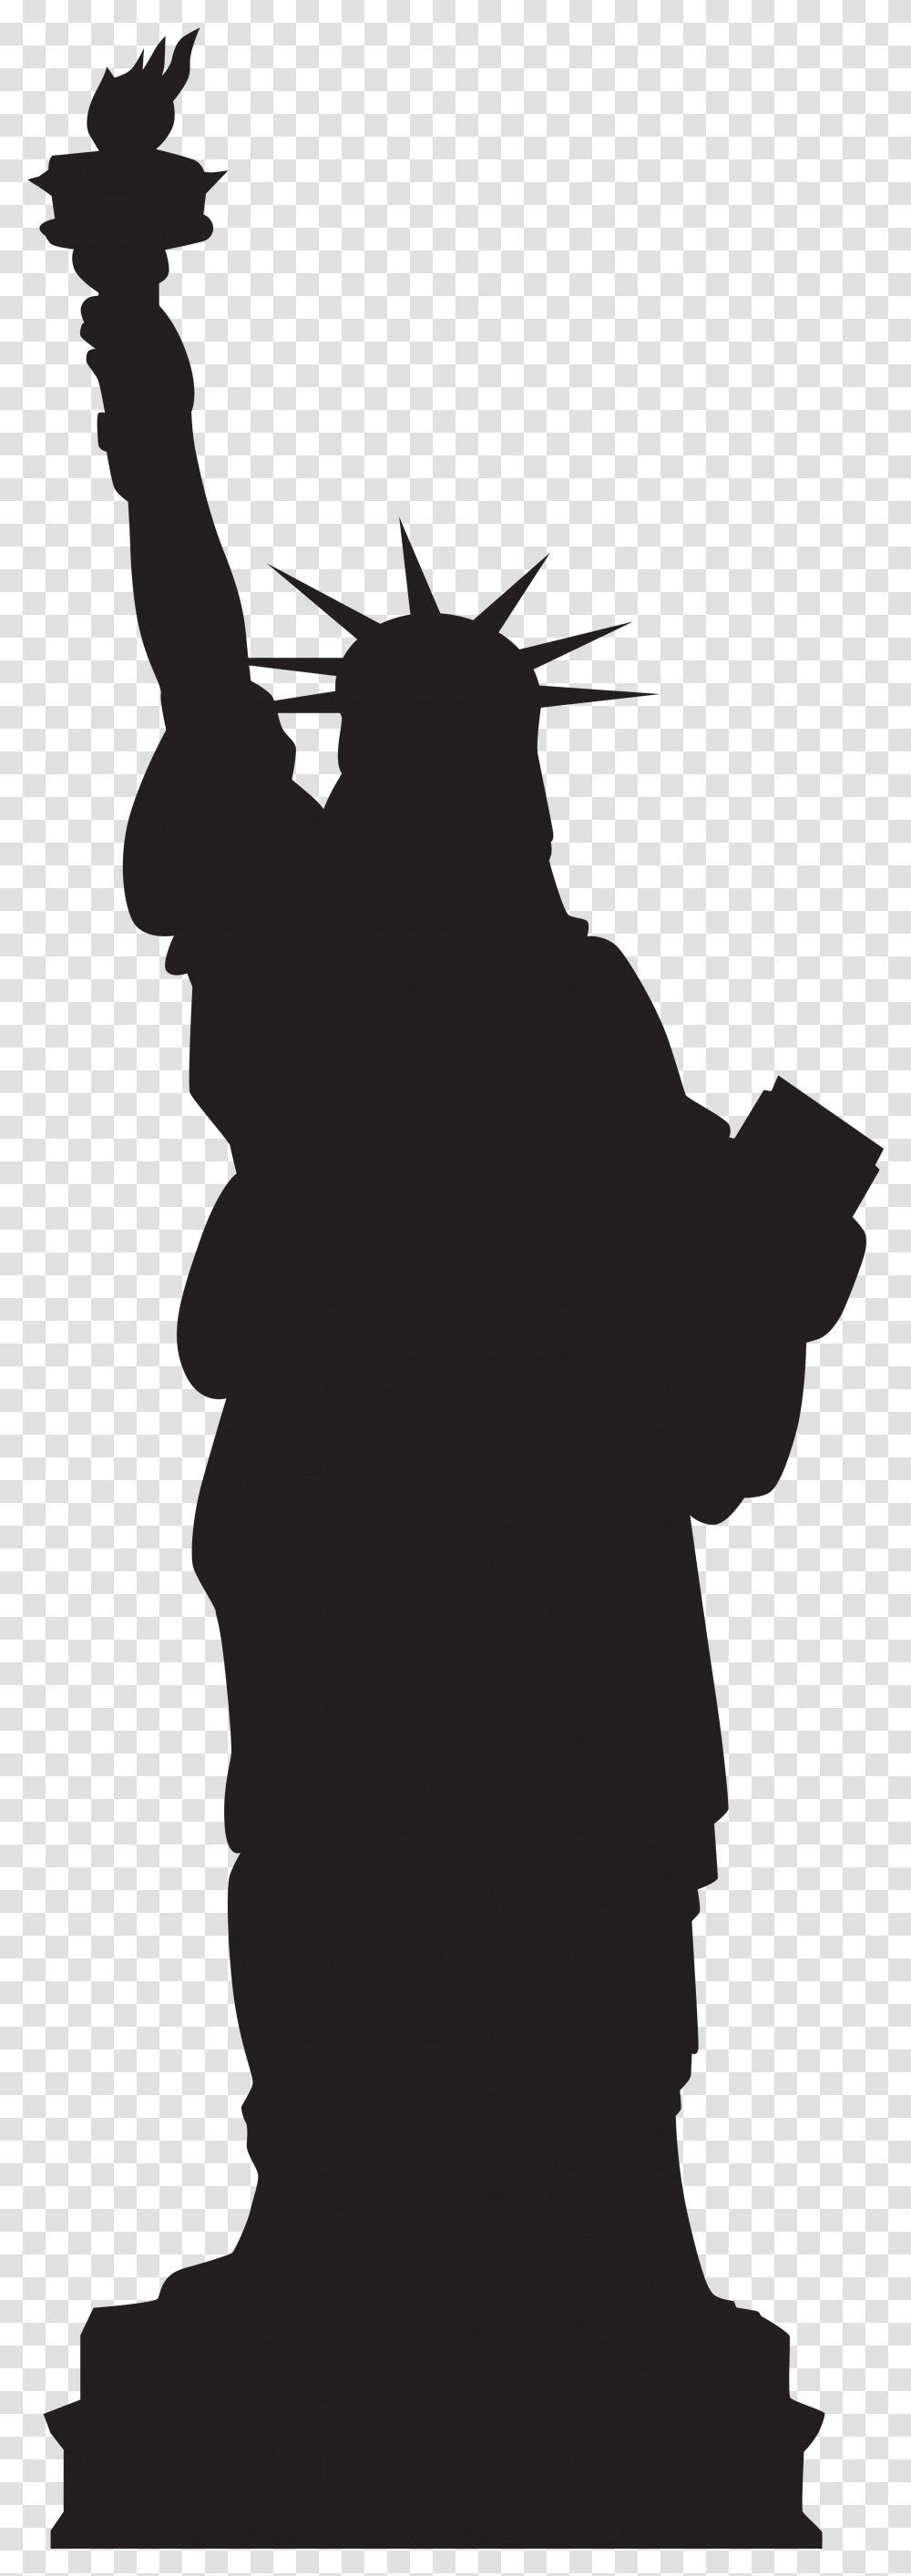 Statue Of Liberty Silhouette Statue Of Liberty, Person, Human, Hand, Kneeling Transparent Png